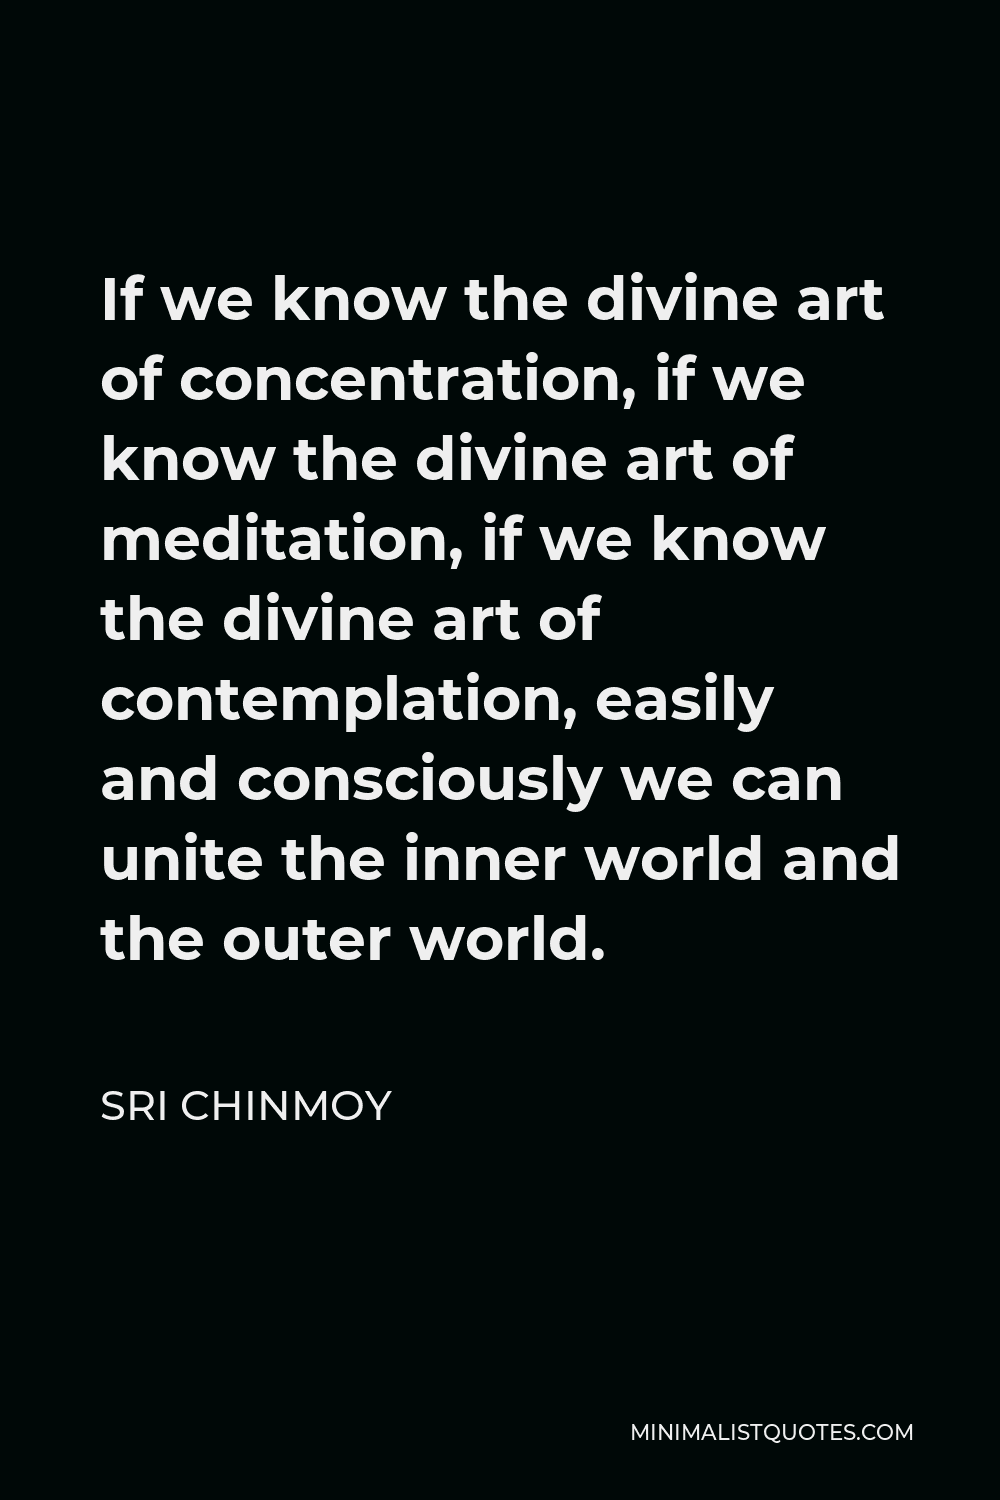 Sri Chinmoy Quote - If we know the divine art of concentration, if we know the divine art of meditation, if we know the divine art of contemplation, easily and consciously we can unite the inner world and the outer world.